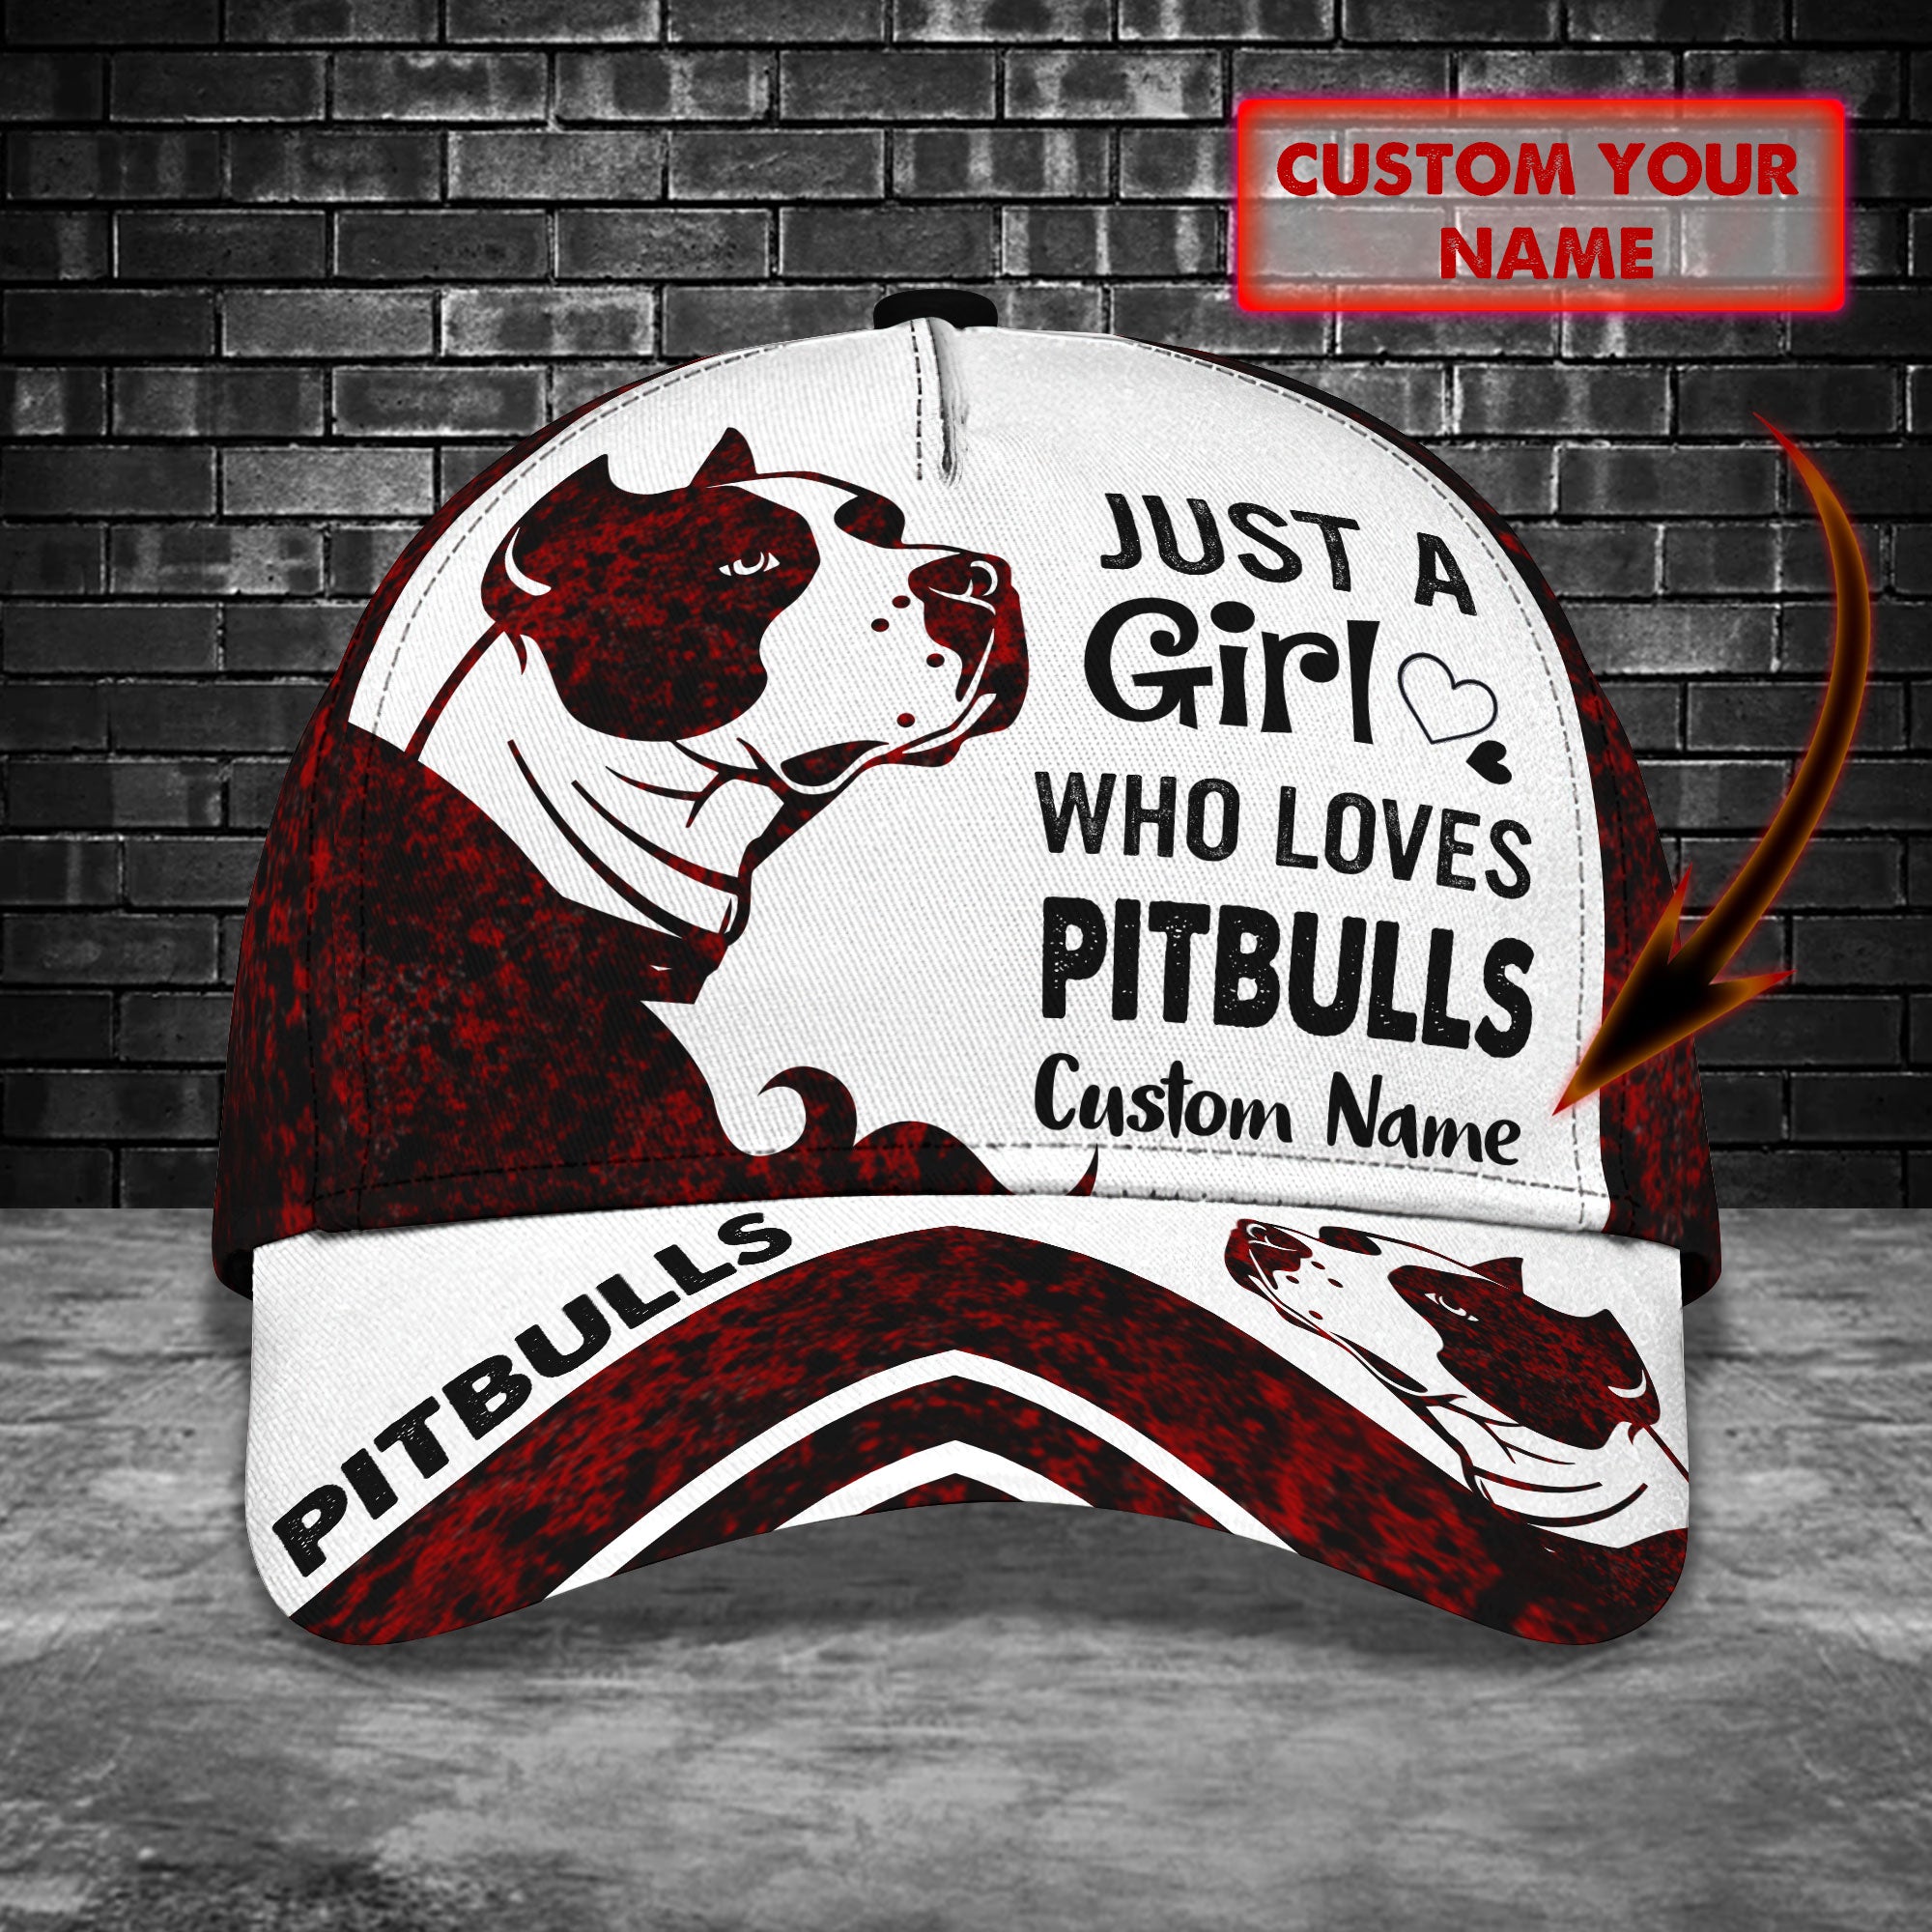 Just A Girl Who Loves Pitbull - Personalized Name Cap -Loop- T2k -140